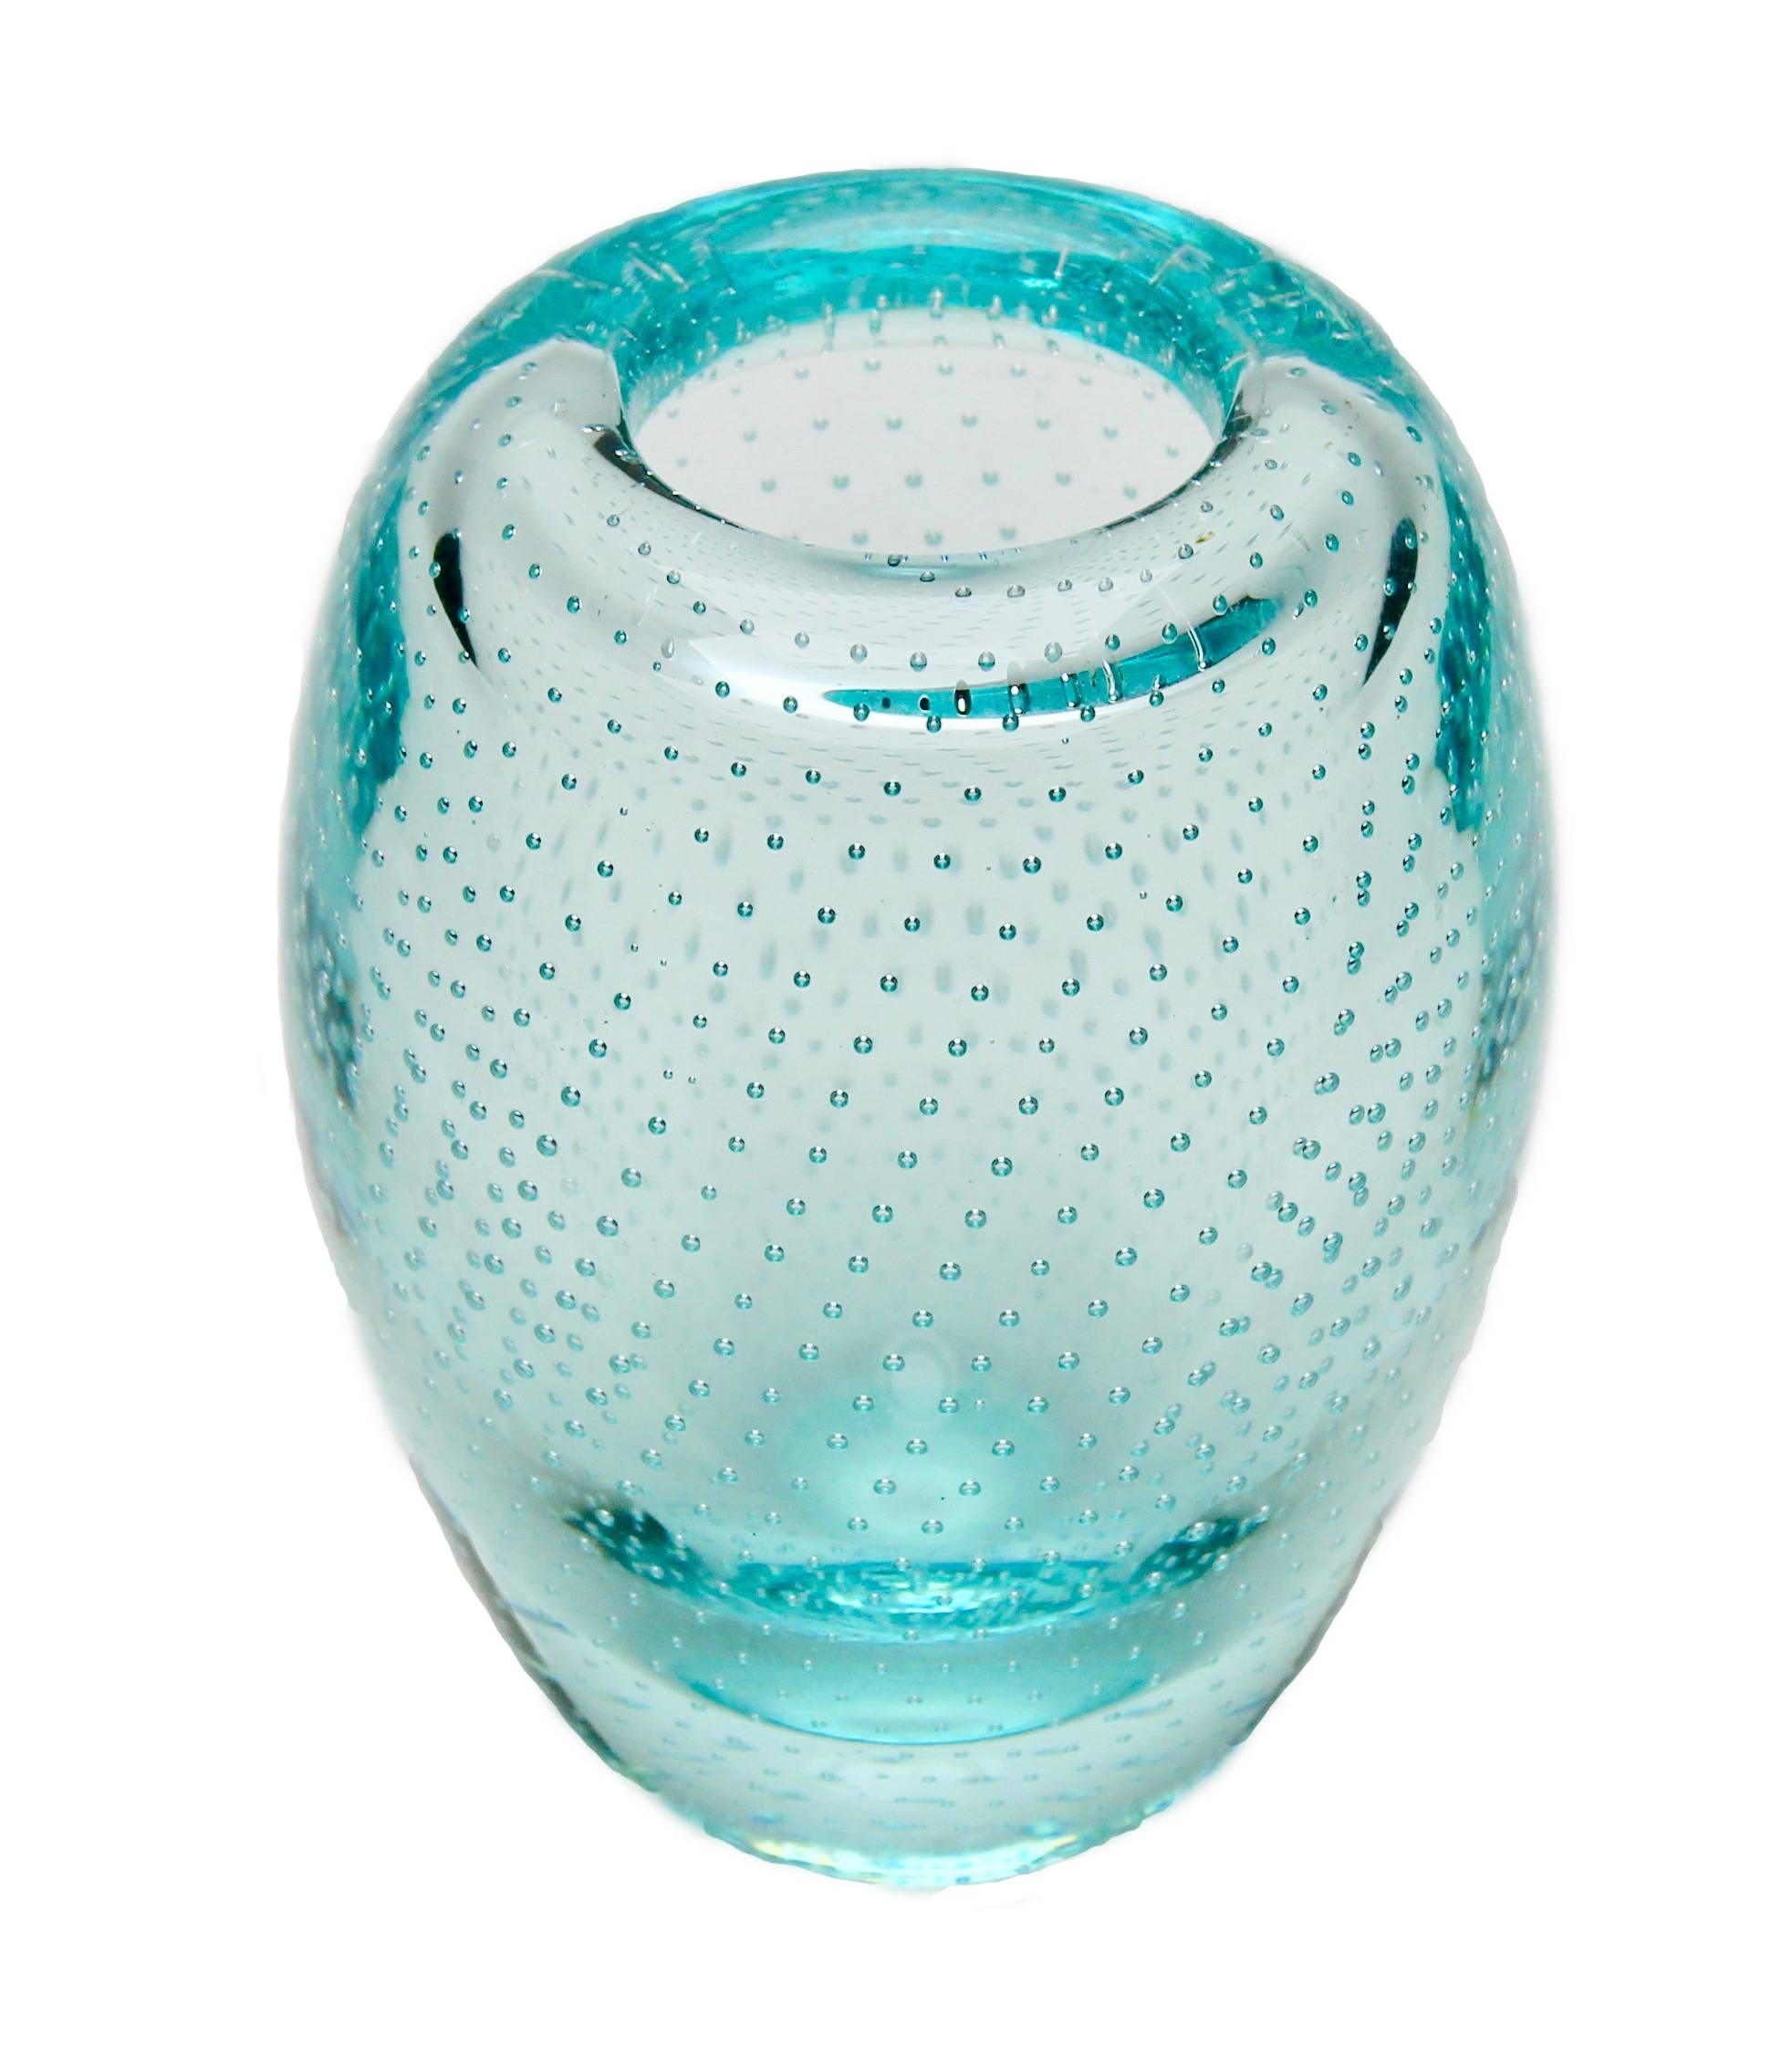 Beautiful glass vase and bowl by Gunnel Nyman with controlled bubble technique, with tiny bubbles captured inside the blue tinted glass.
Designer: Gunnel Nyman.

Rare matched set by Gunnel Nyman (Nuutajarvi, Finland), circa 1950
Both in